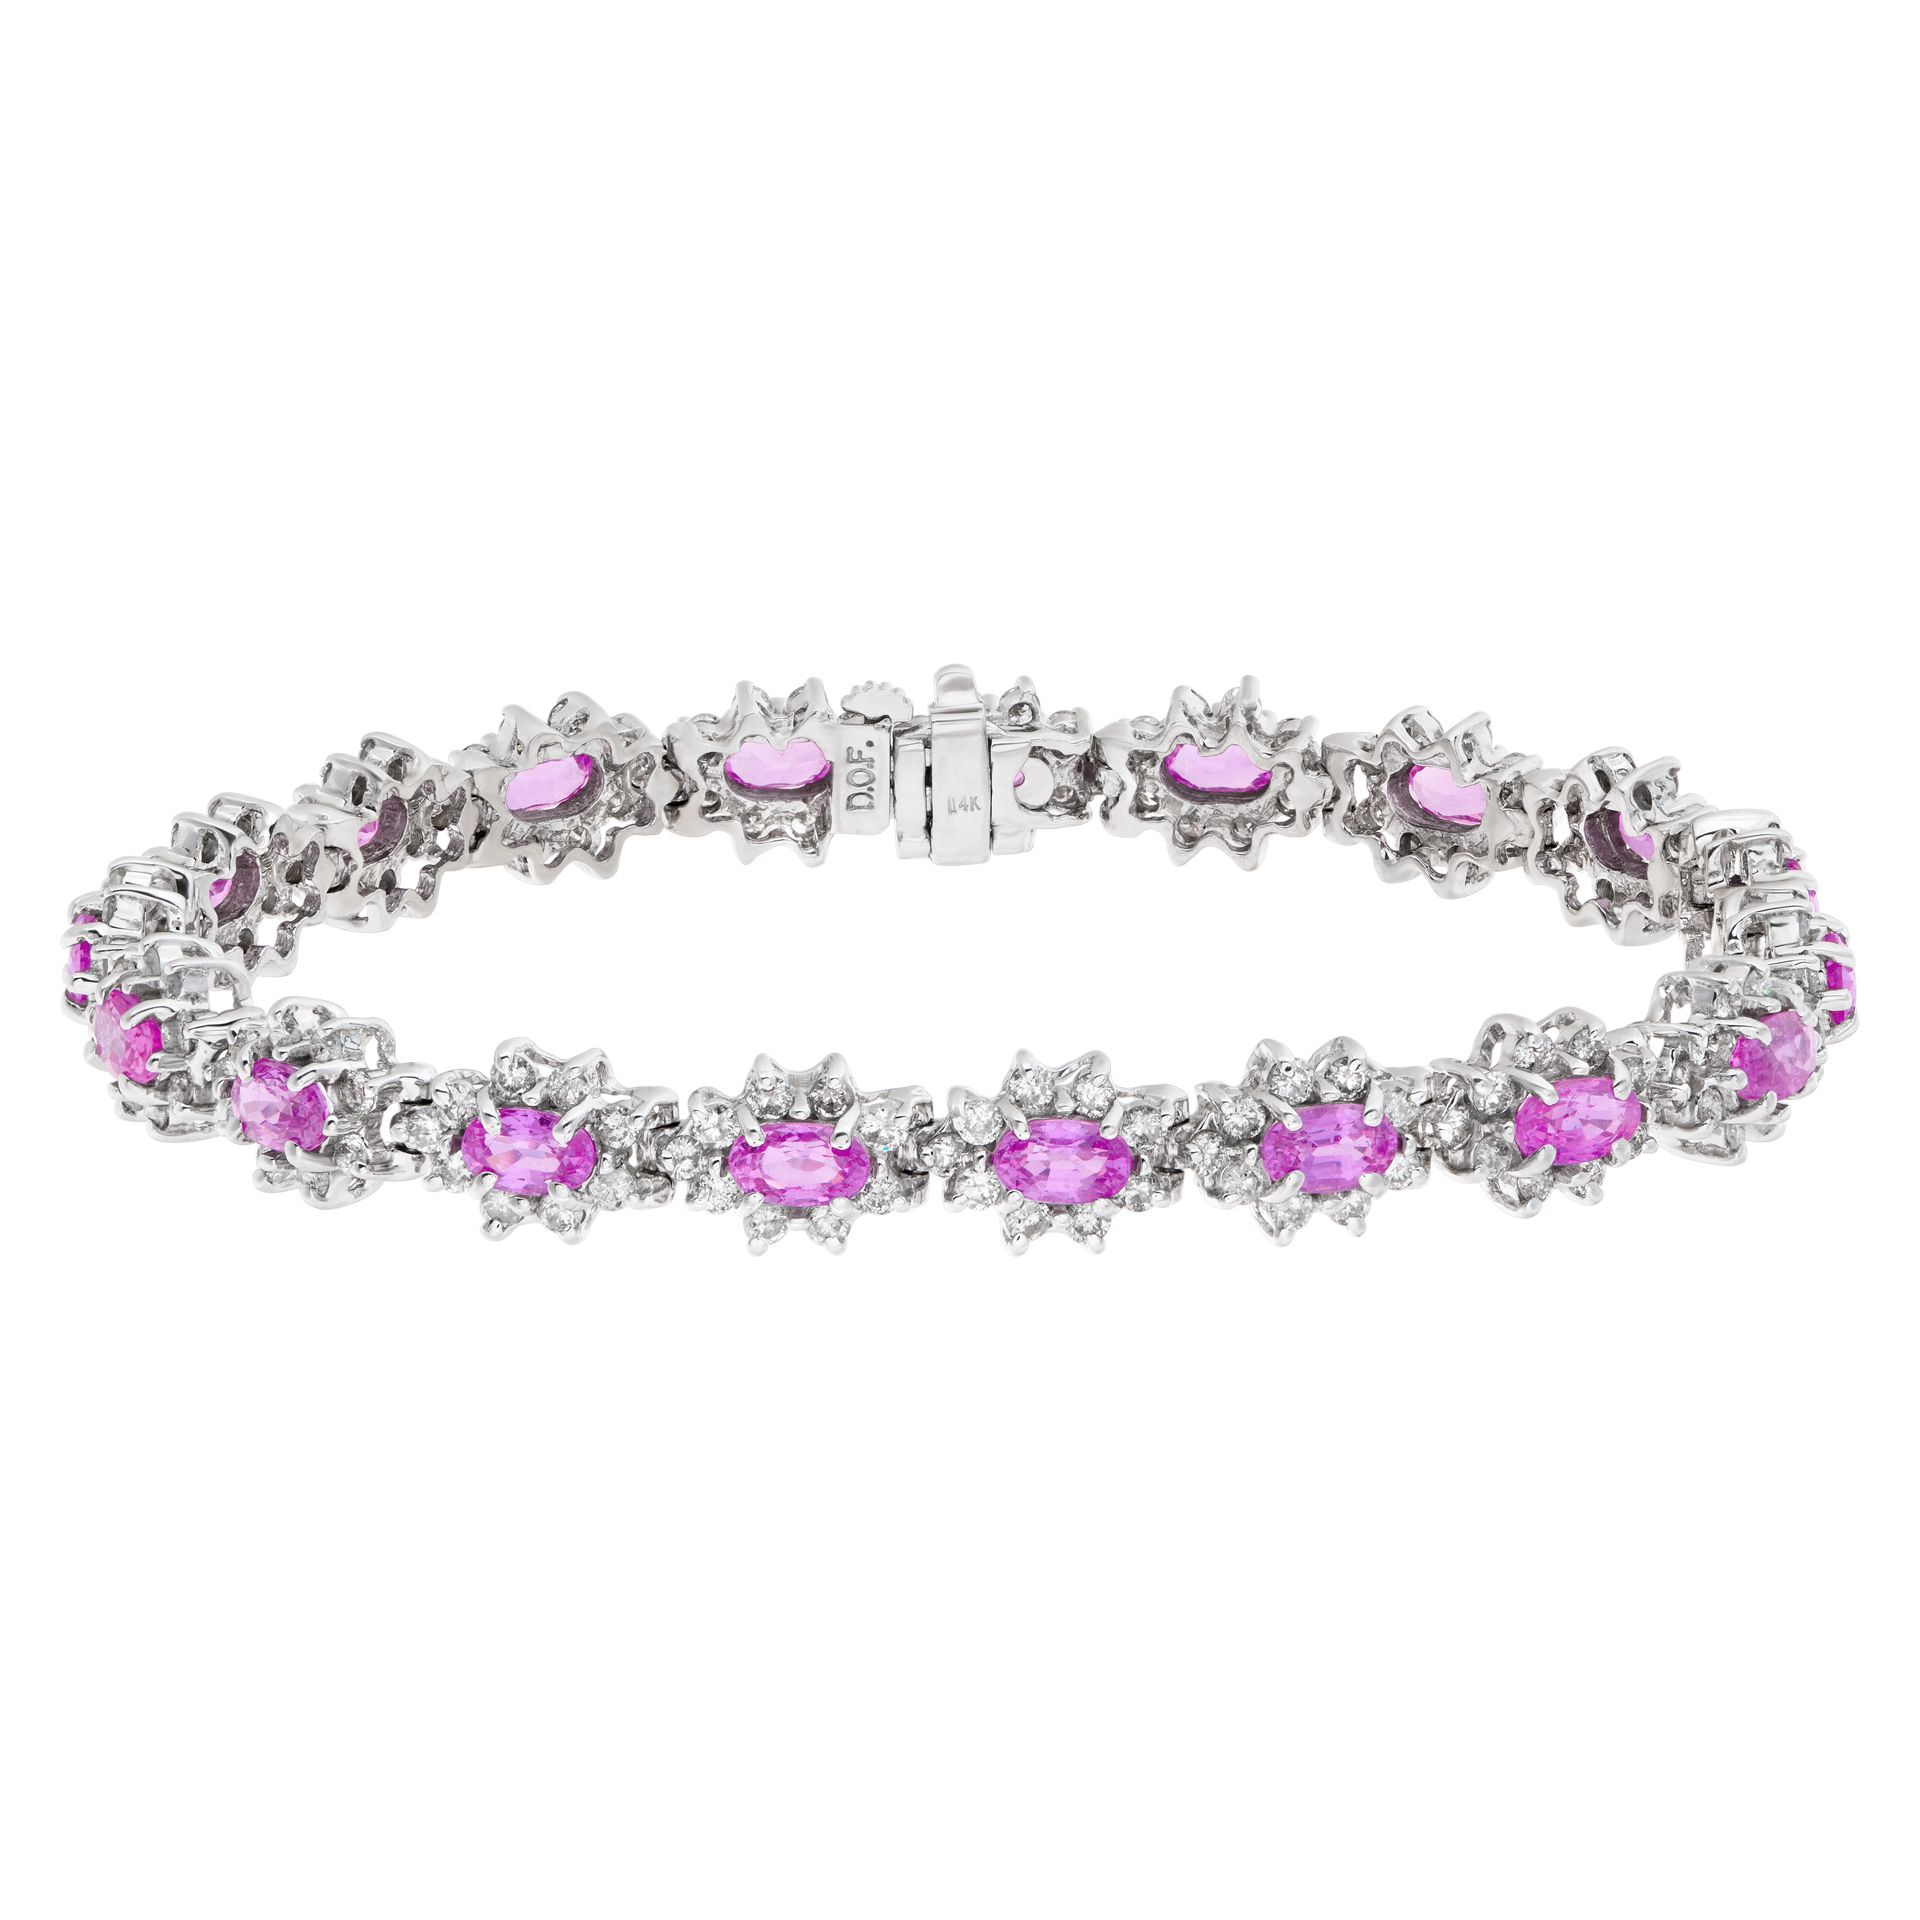 14k white gold bracelet with 6.55 cts in pink sapphires and 3.25 cts in diamonds